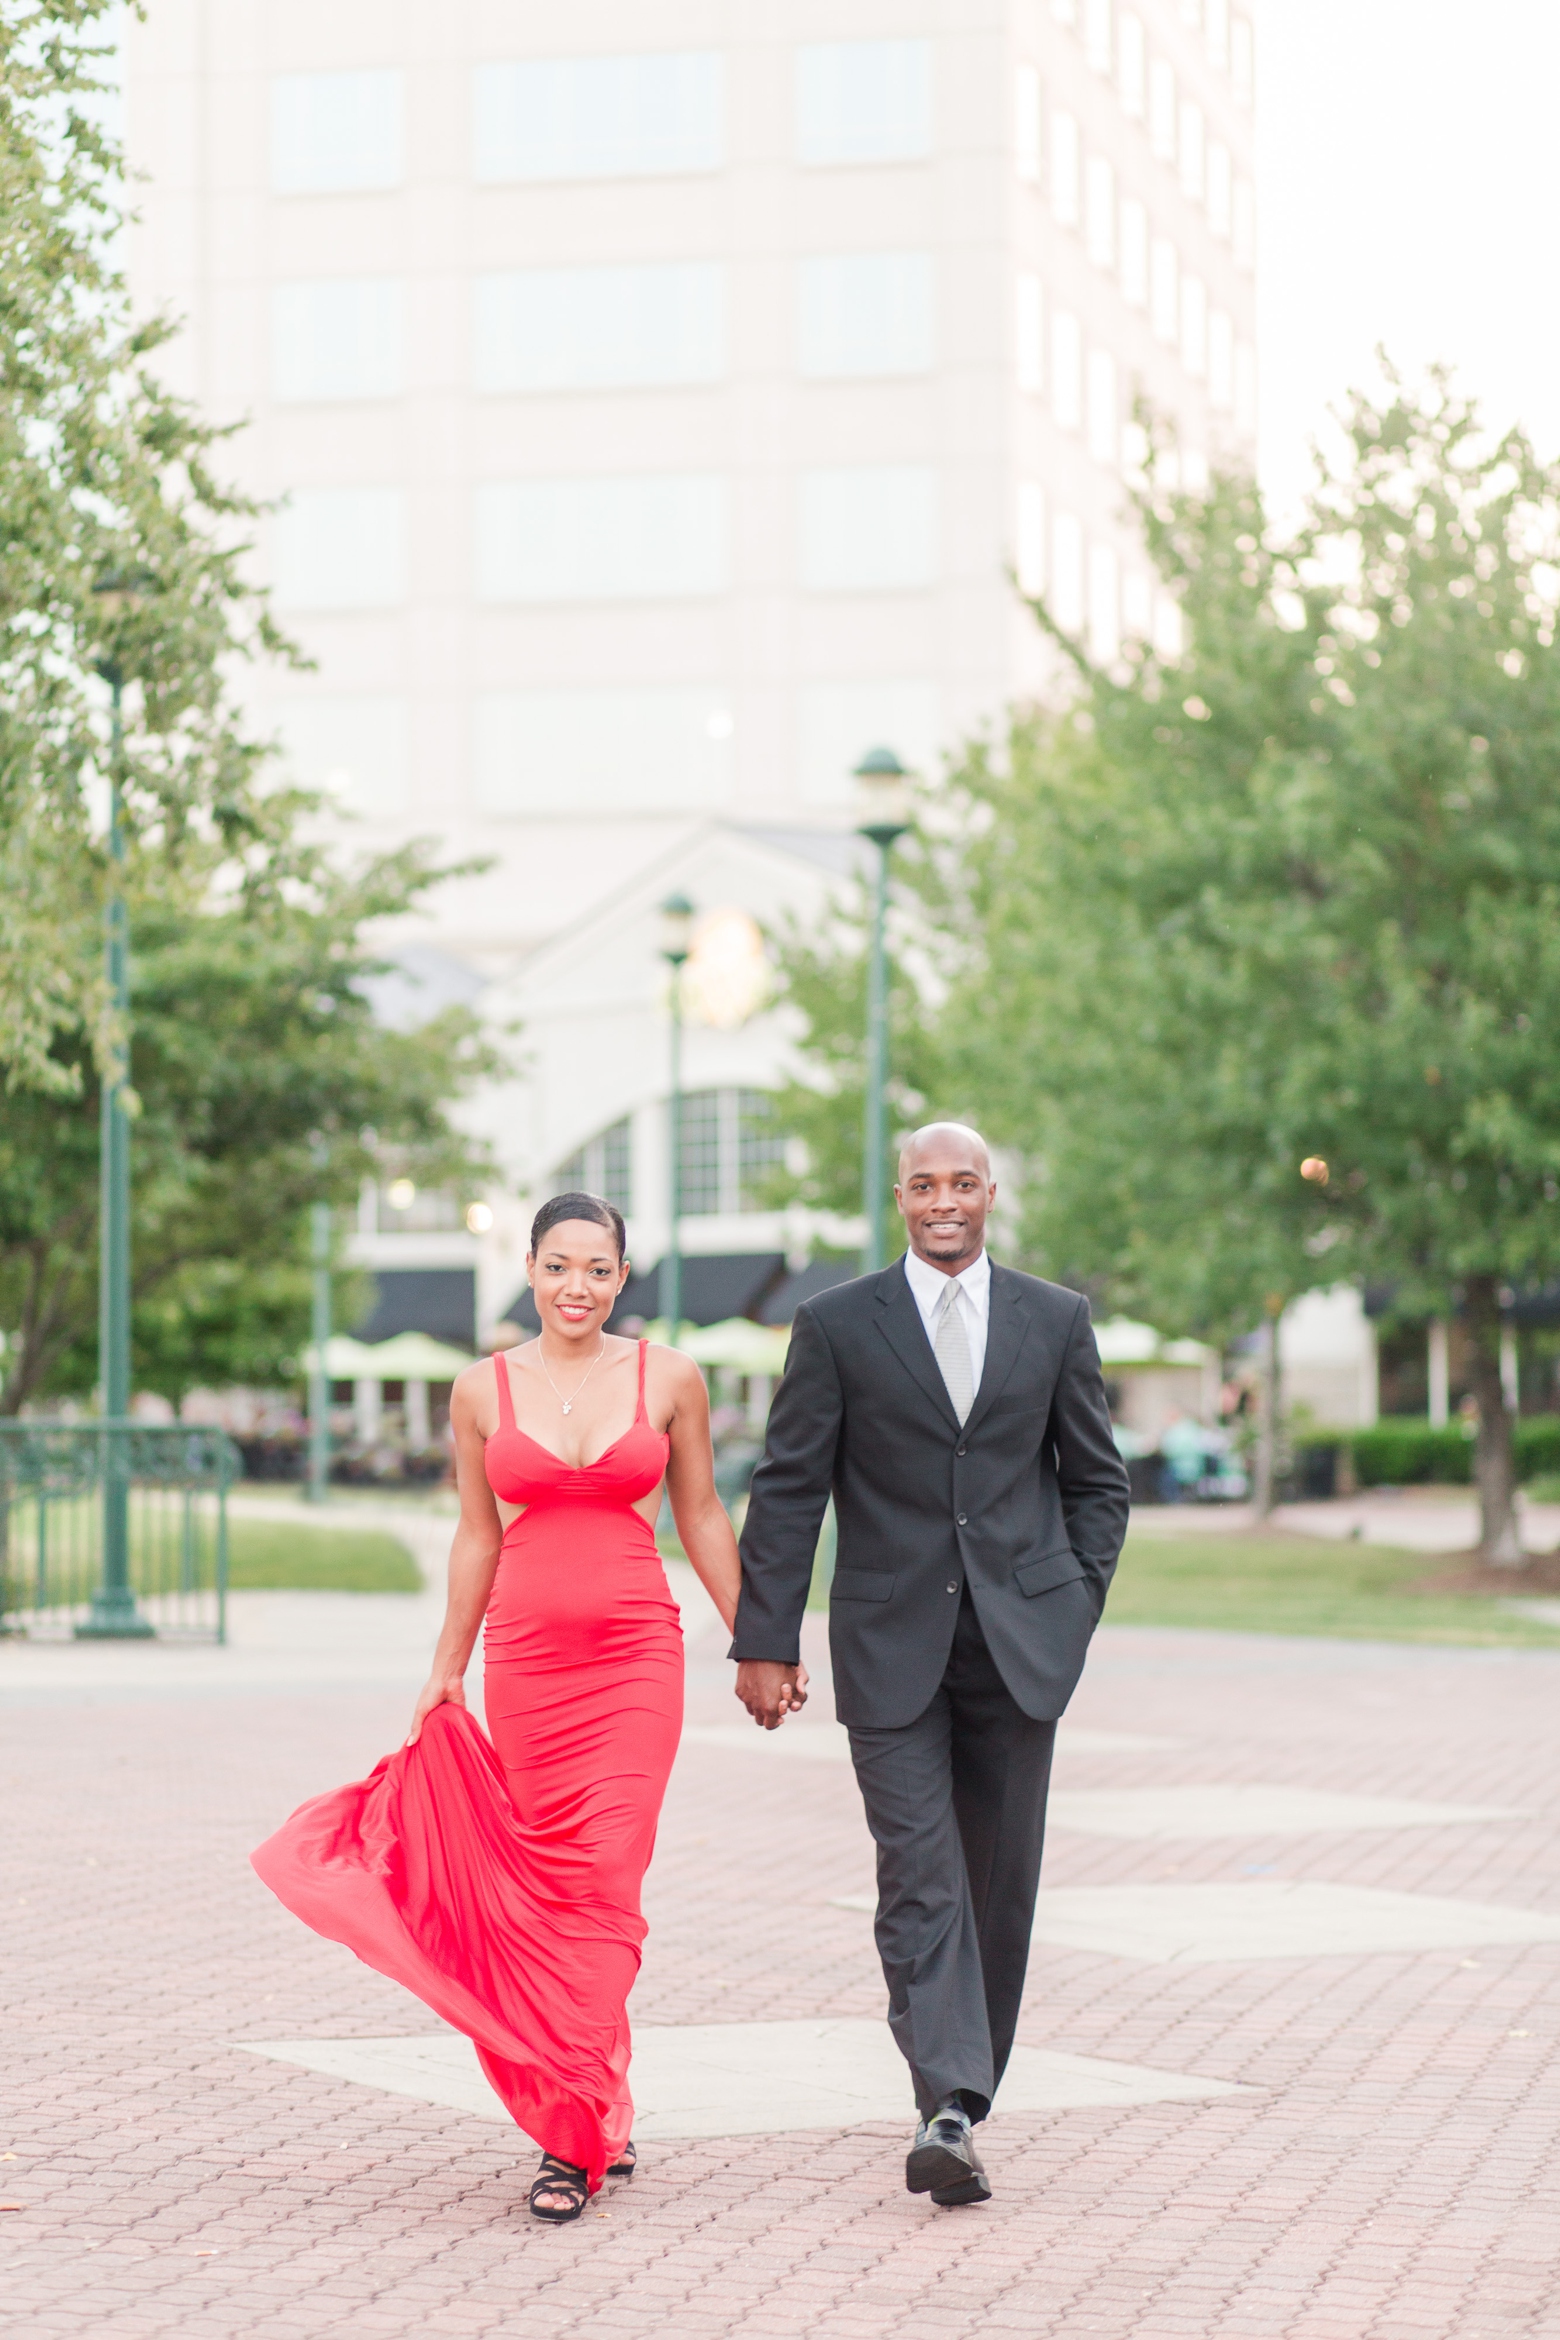 Newport News City Center Couples Photography by Angie McPherson Photography